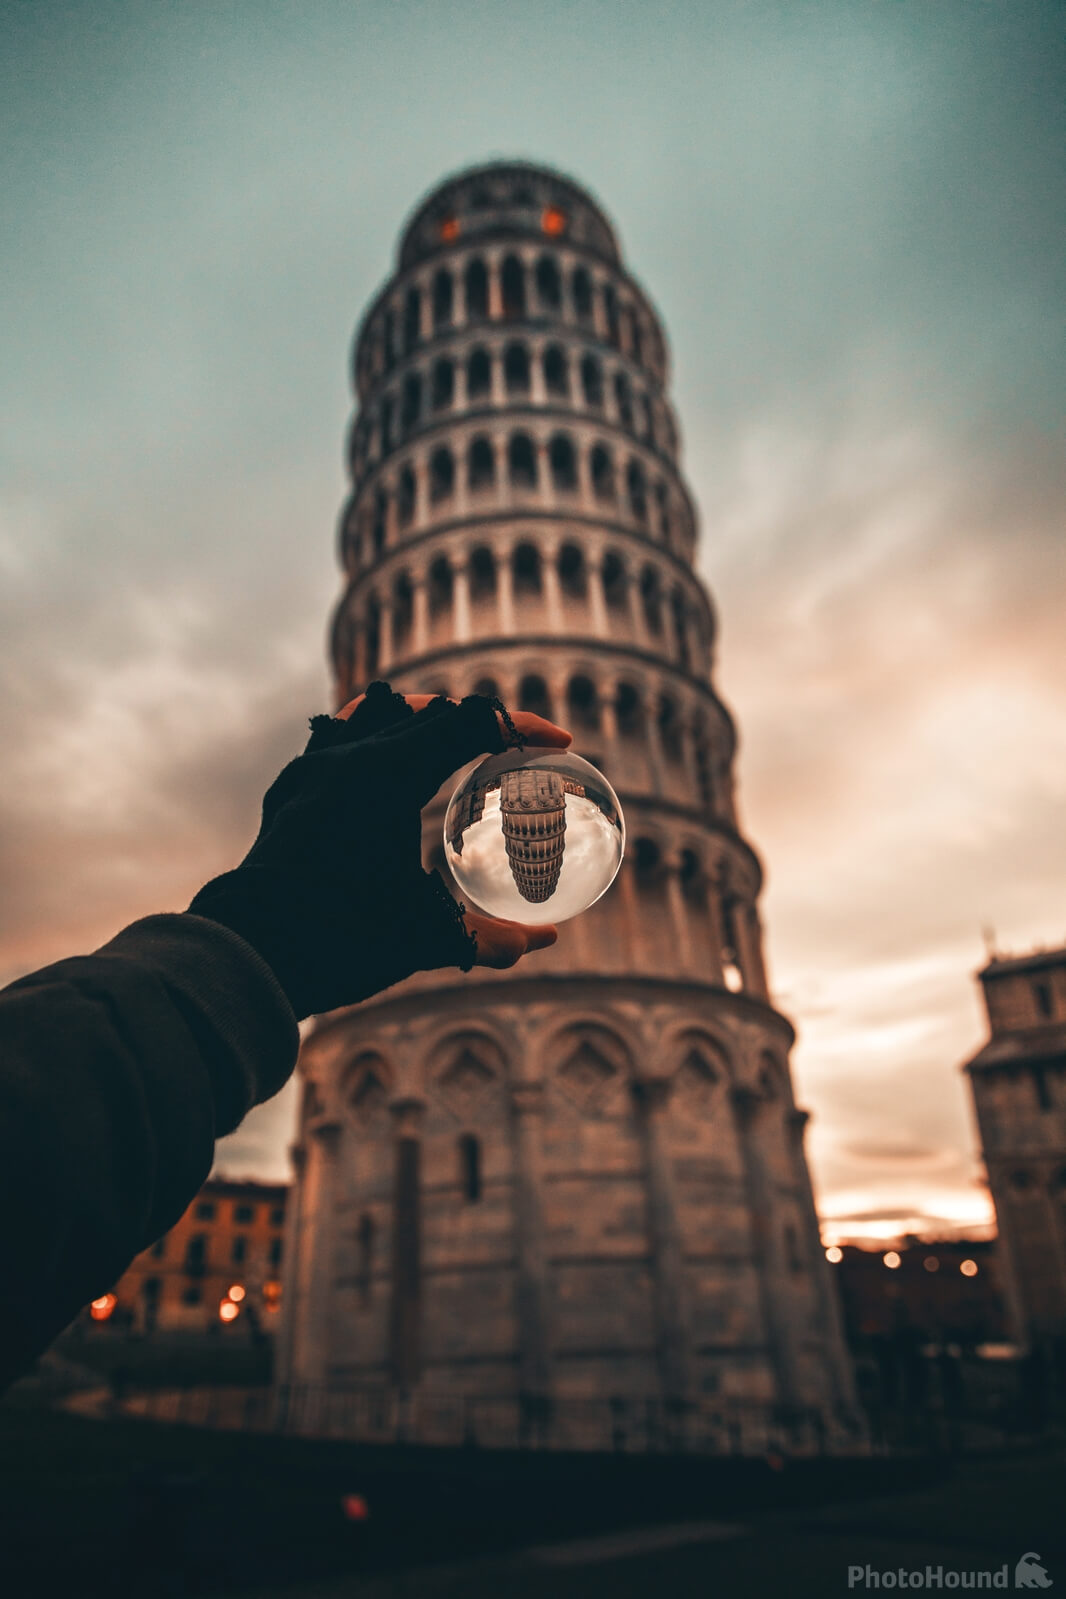 Image of The Leaning Tower Of Pisa - Exterior by Team PhotoHound